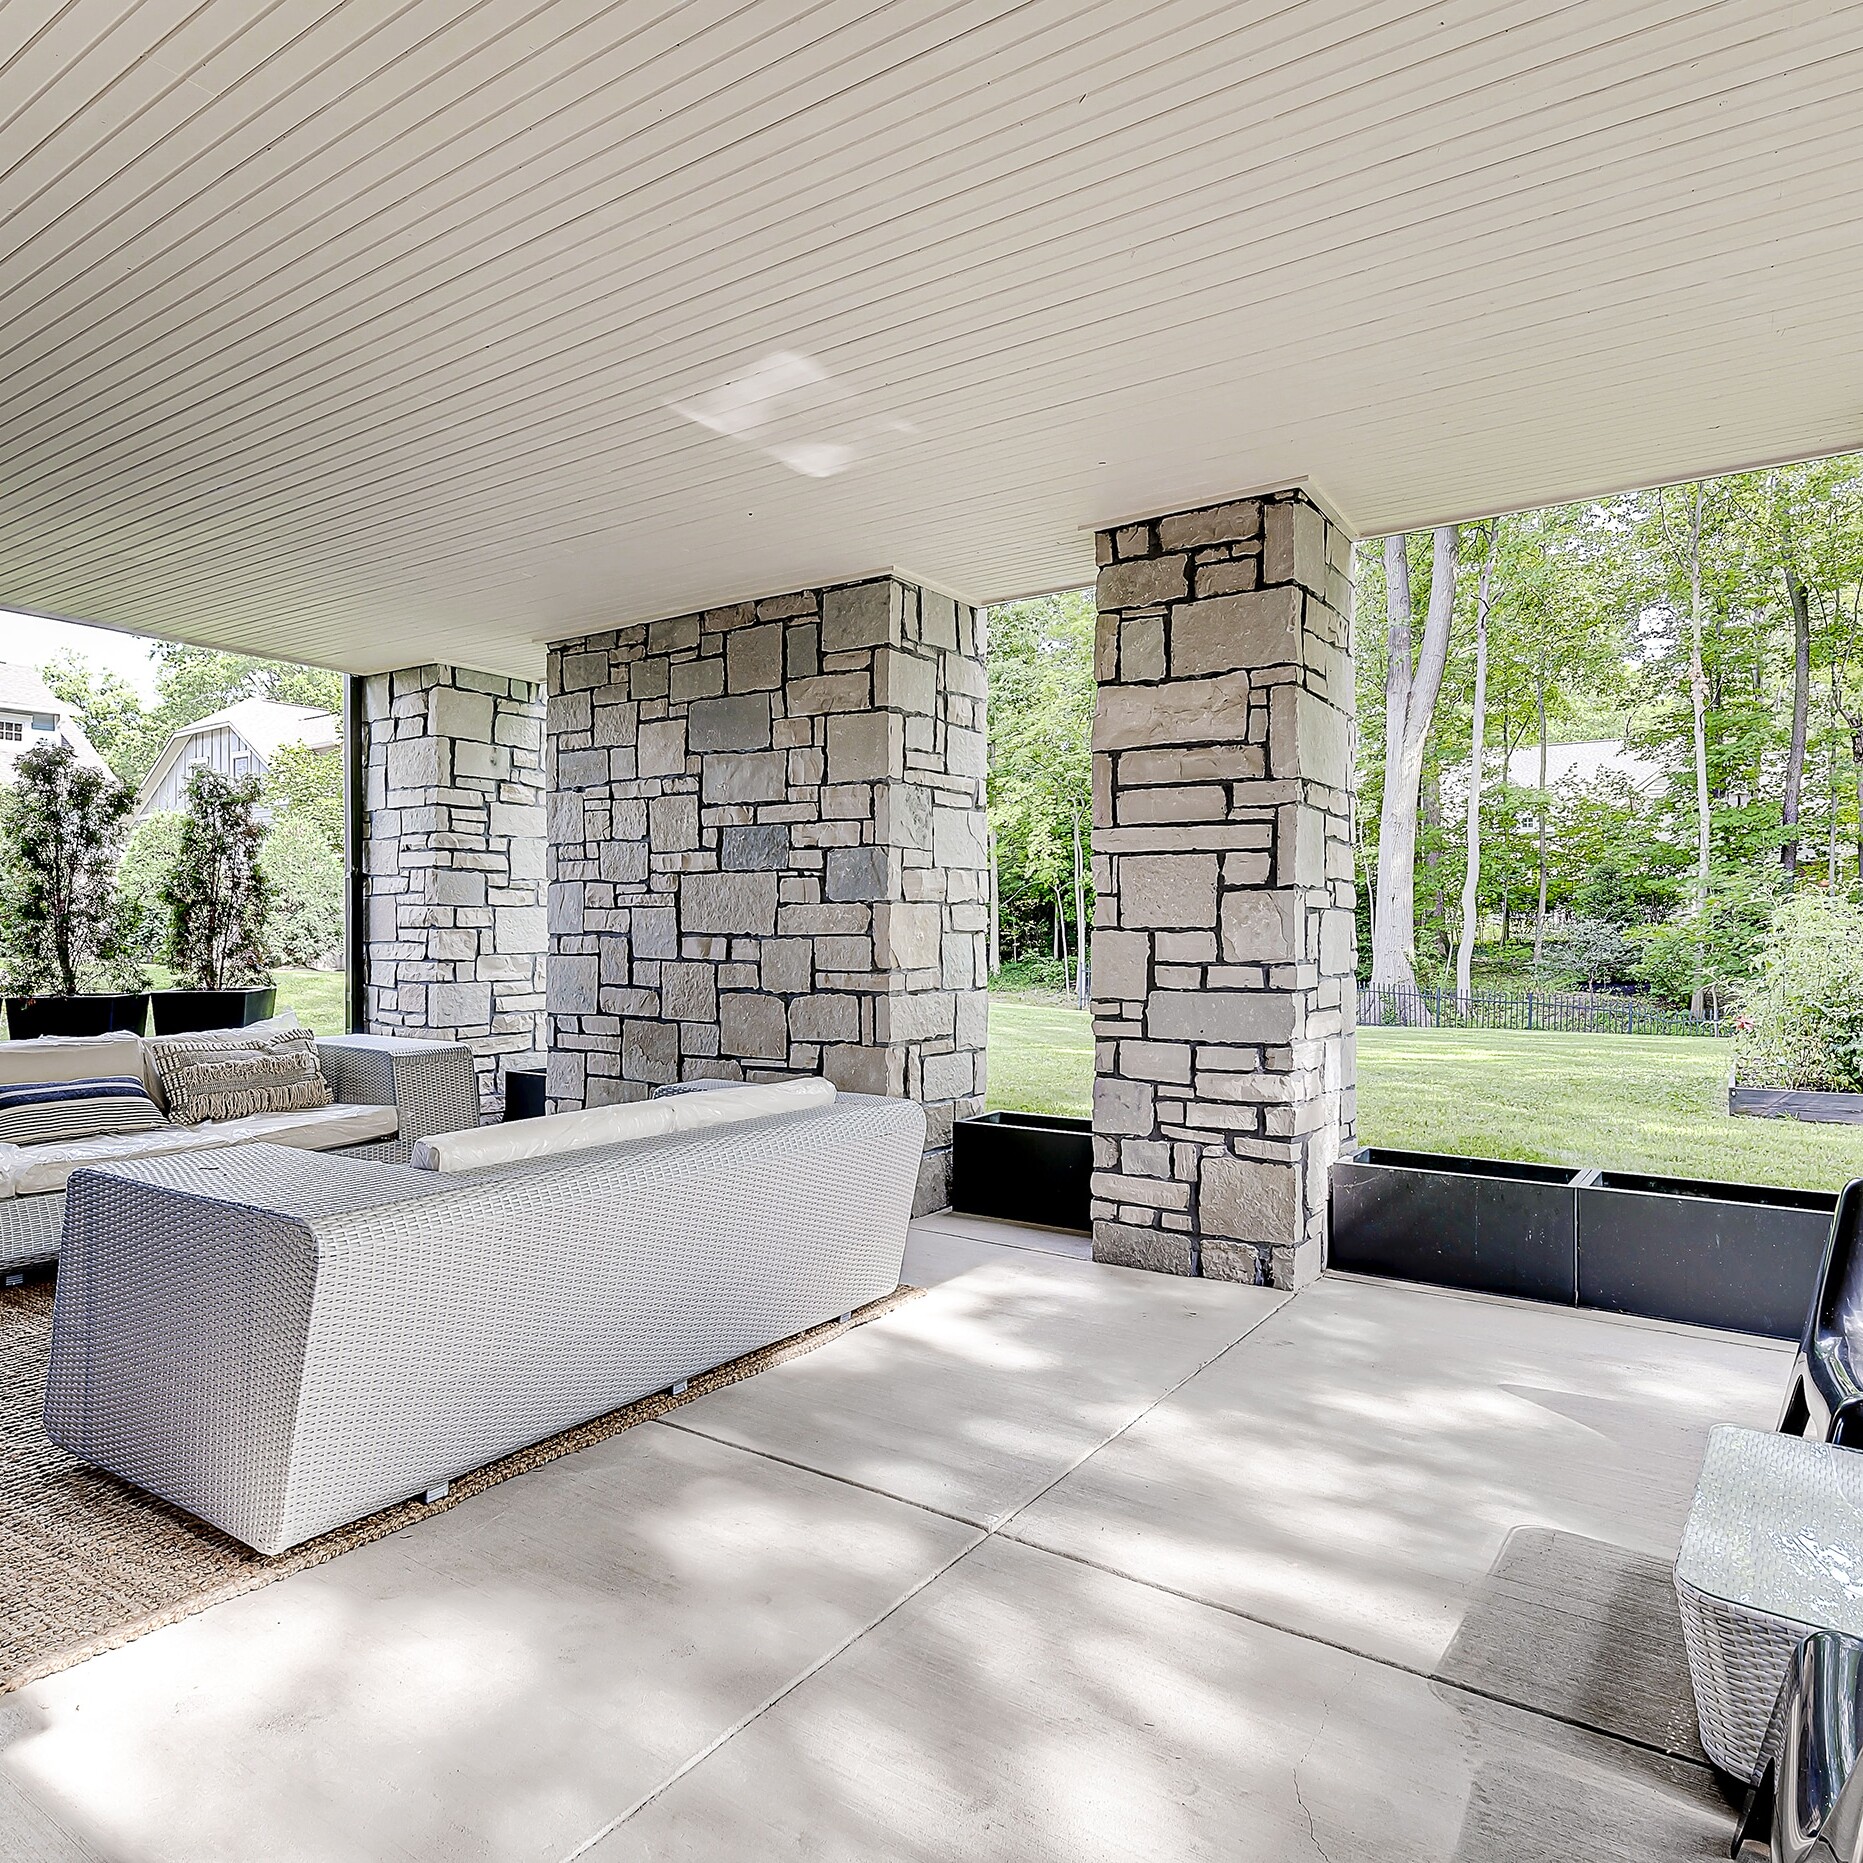 An outdoor living area with couches and a fireplace.